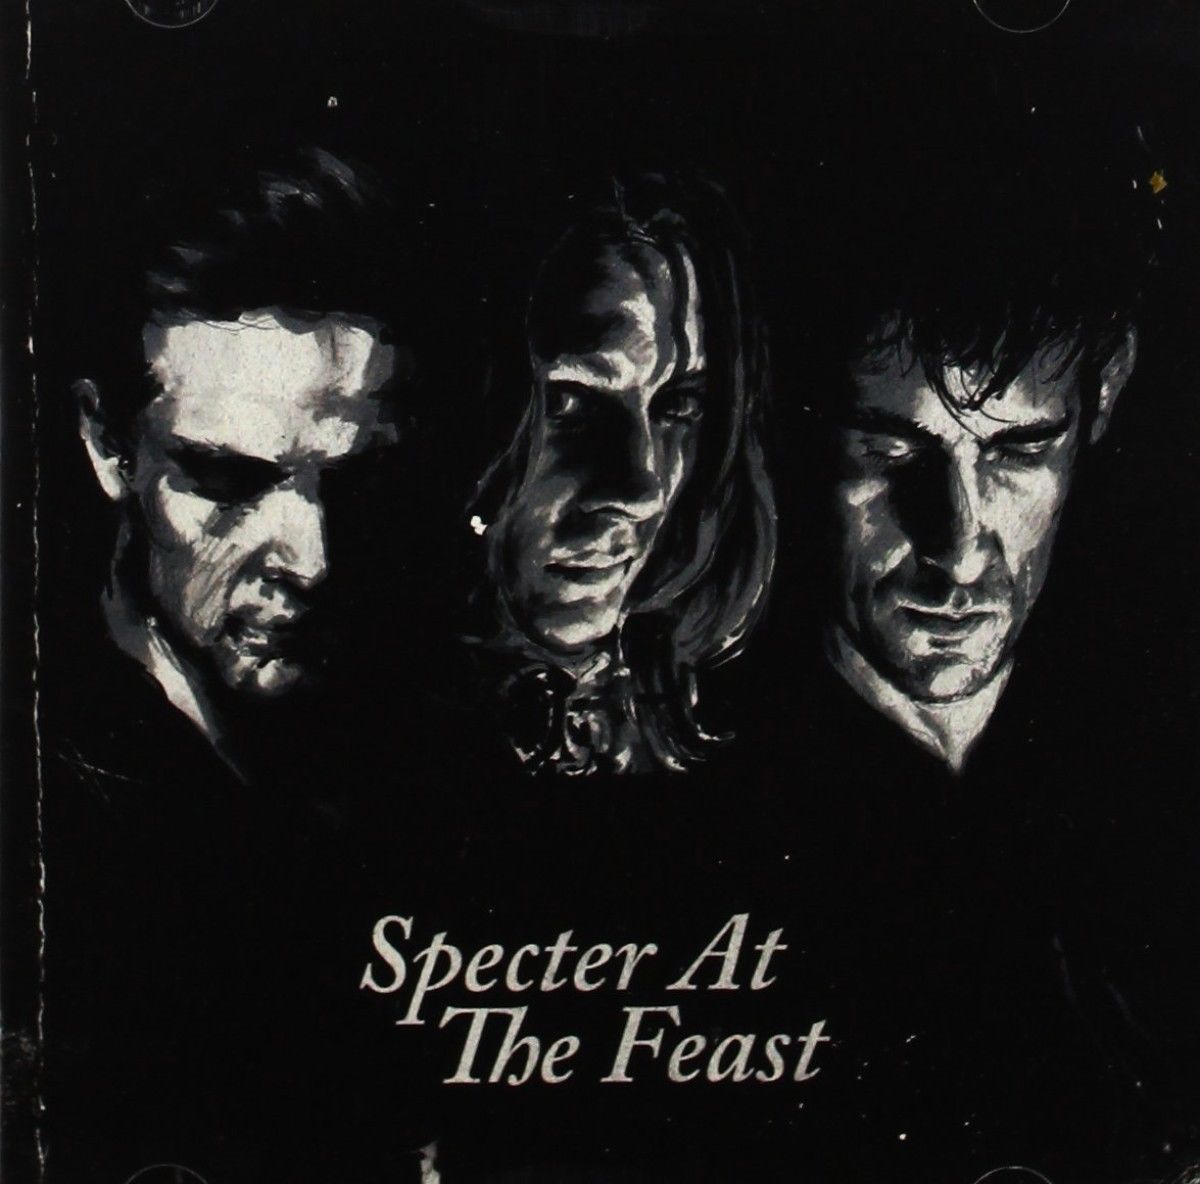 SPECTER AT THE FEAST